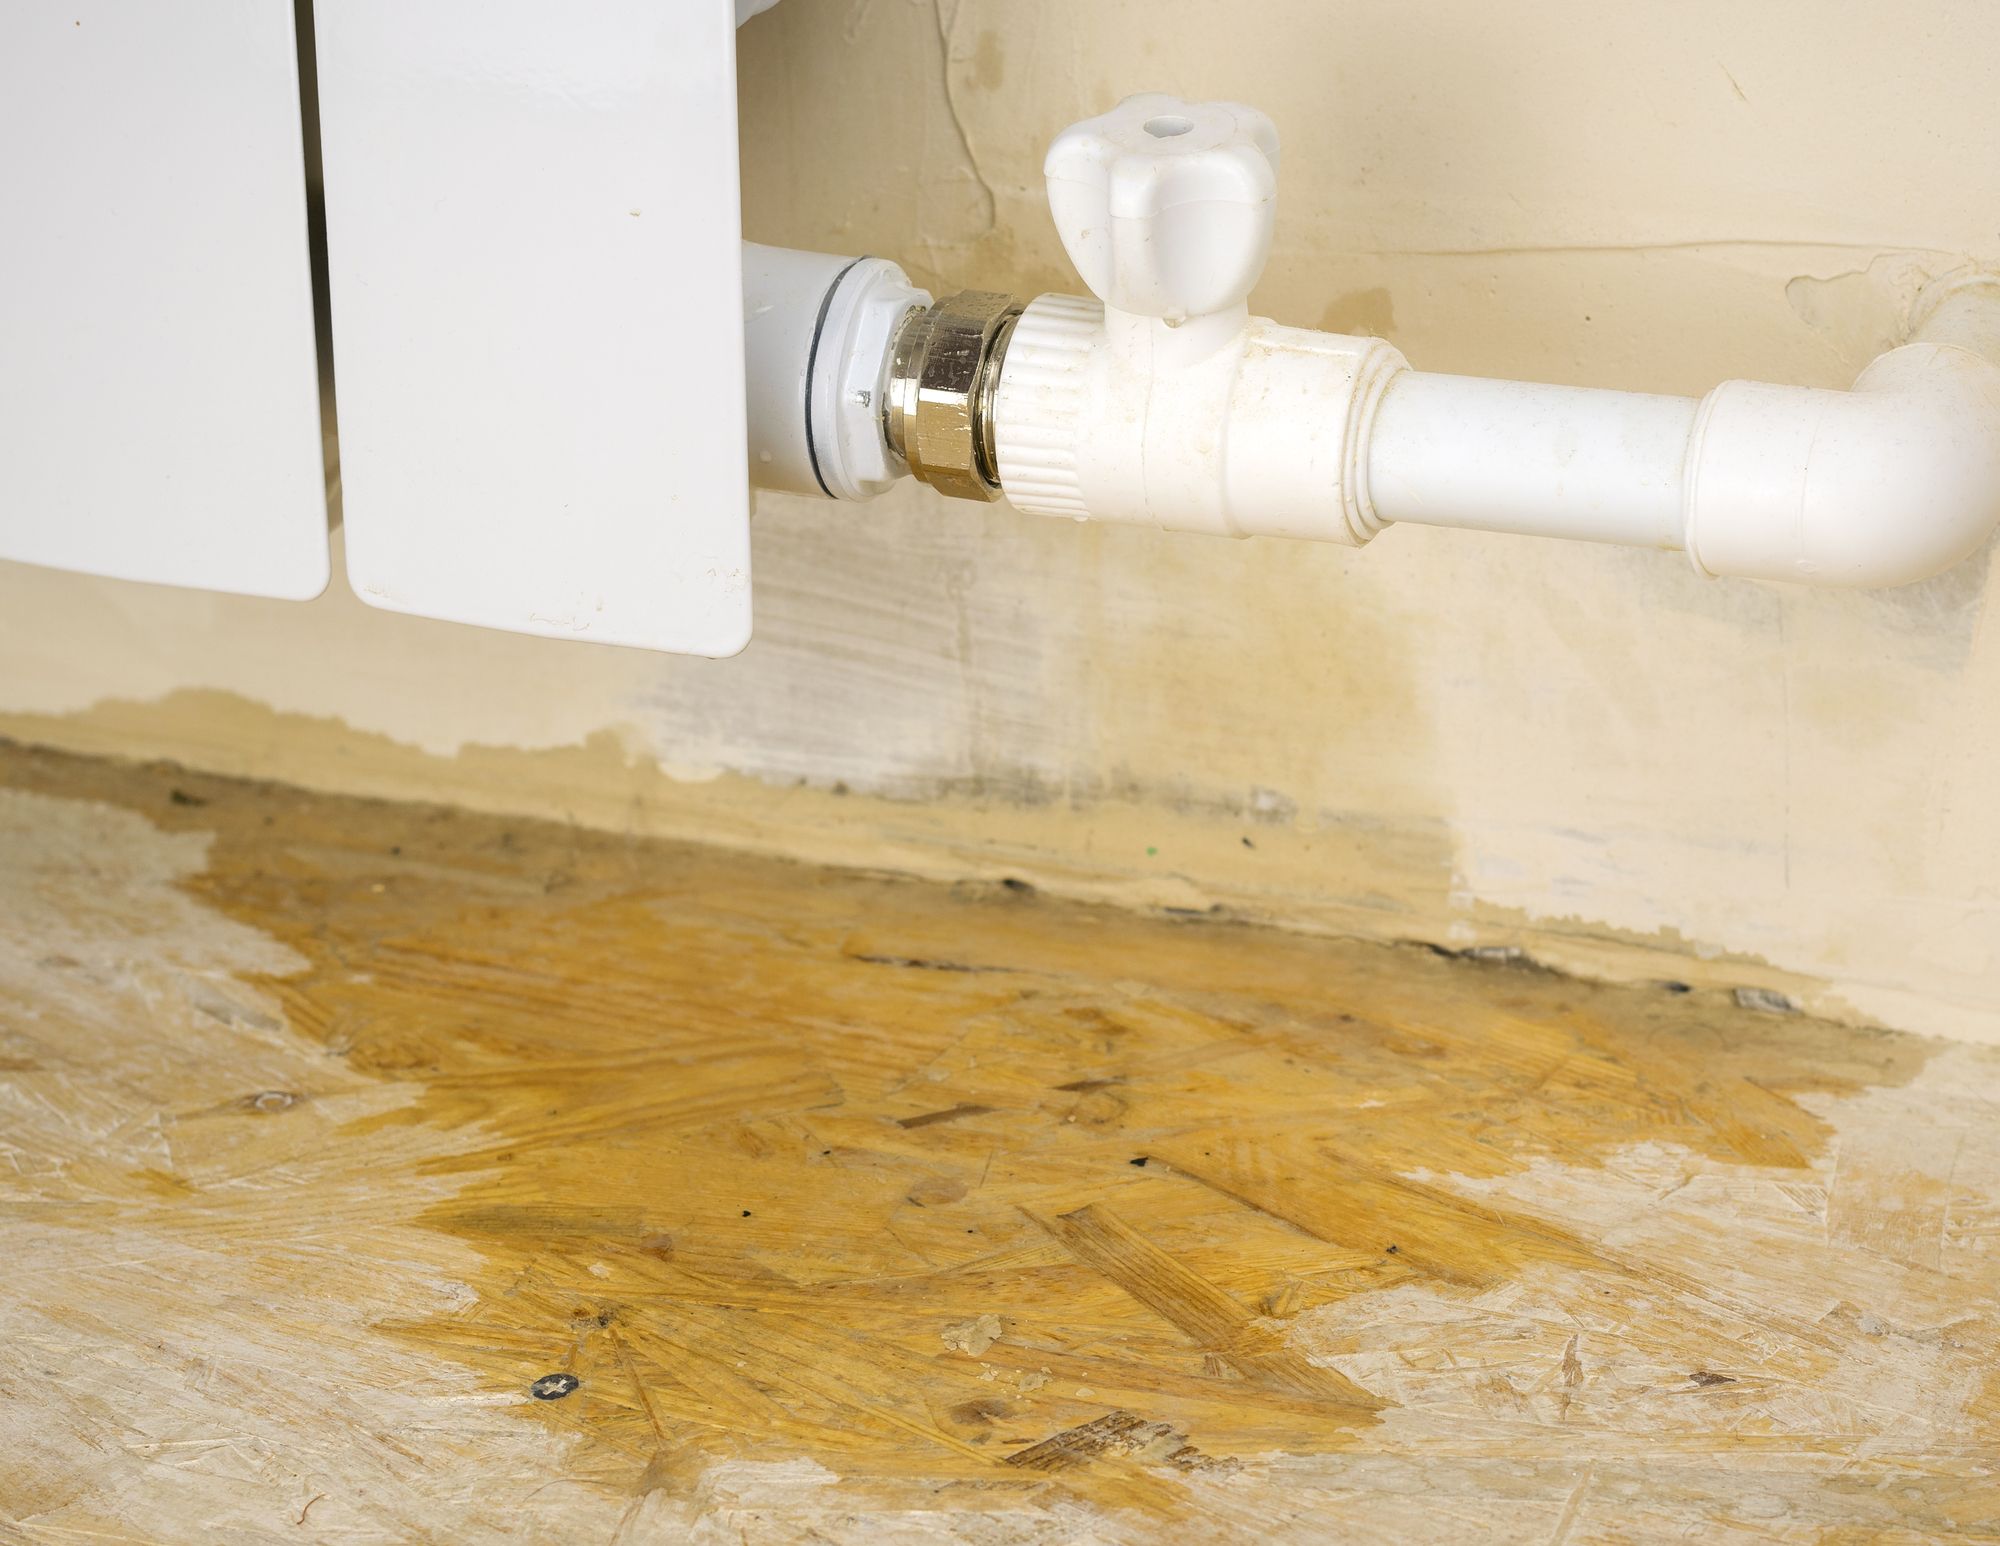 How to Find Water Leaks